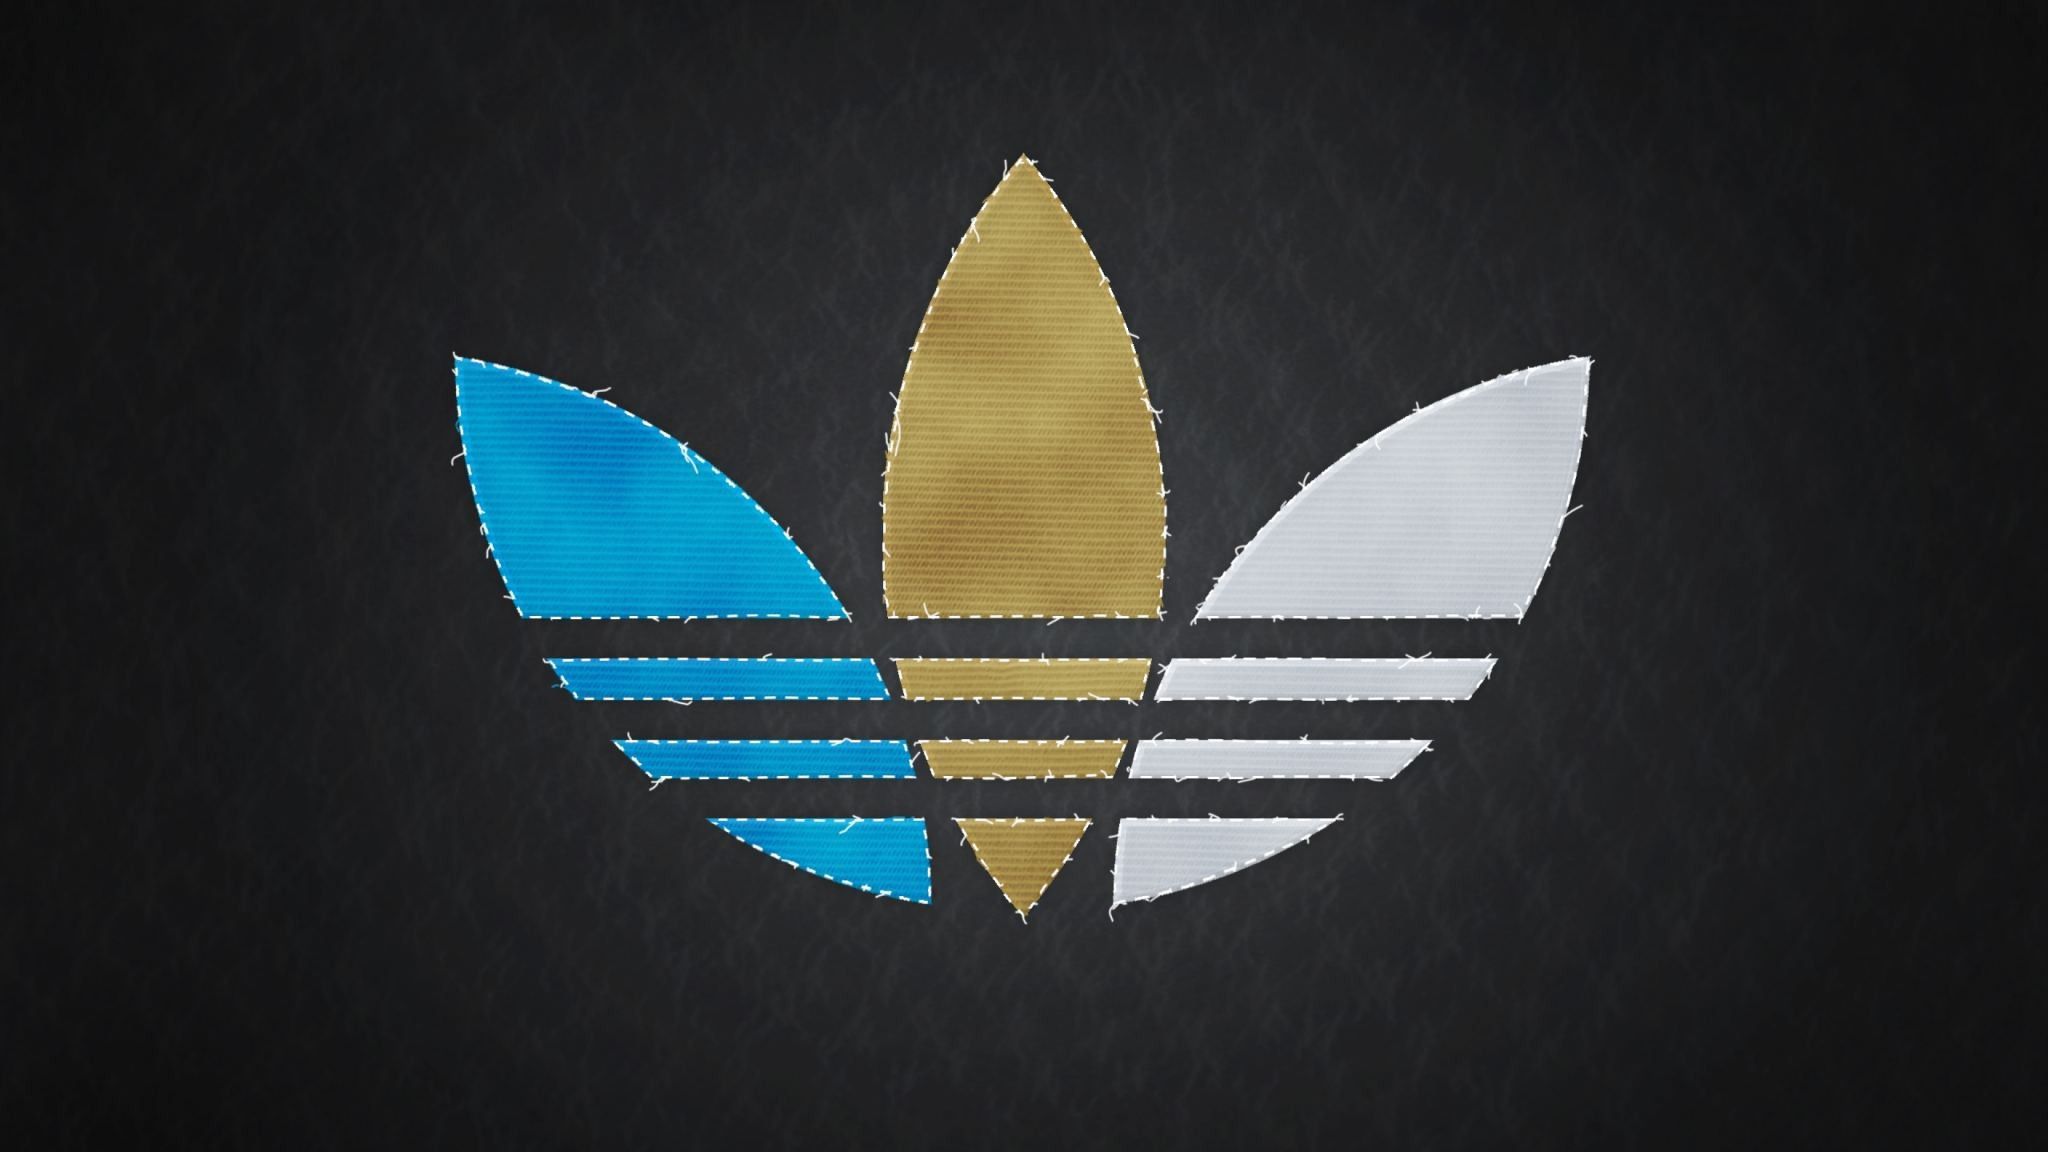 Download Adidas Logo Full HD Background Wallpaper for Desktop and Mobiles 2048x1152